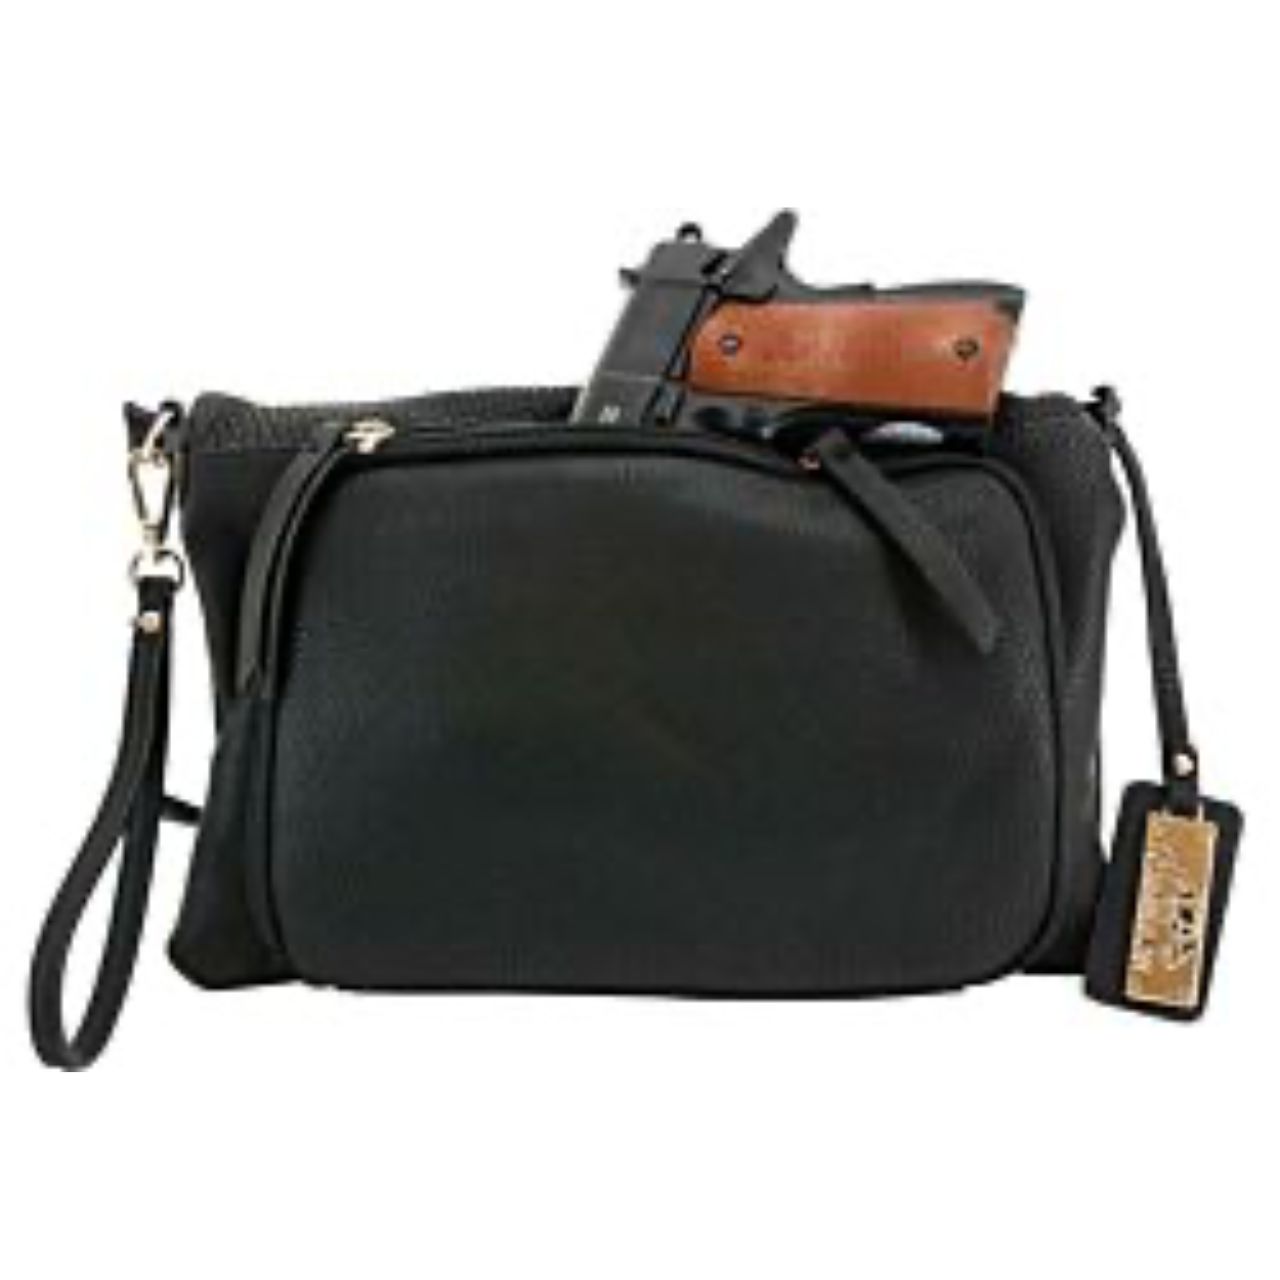 Safely carry your weapon in this concealed carry purse